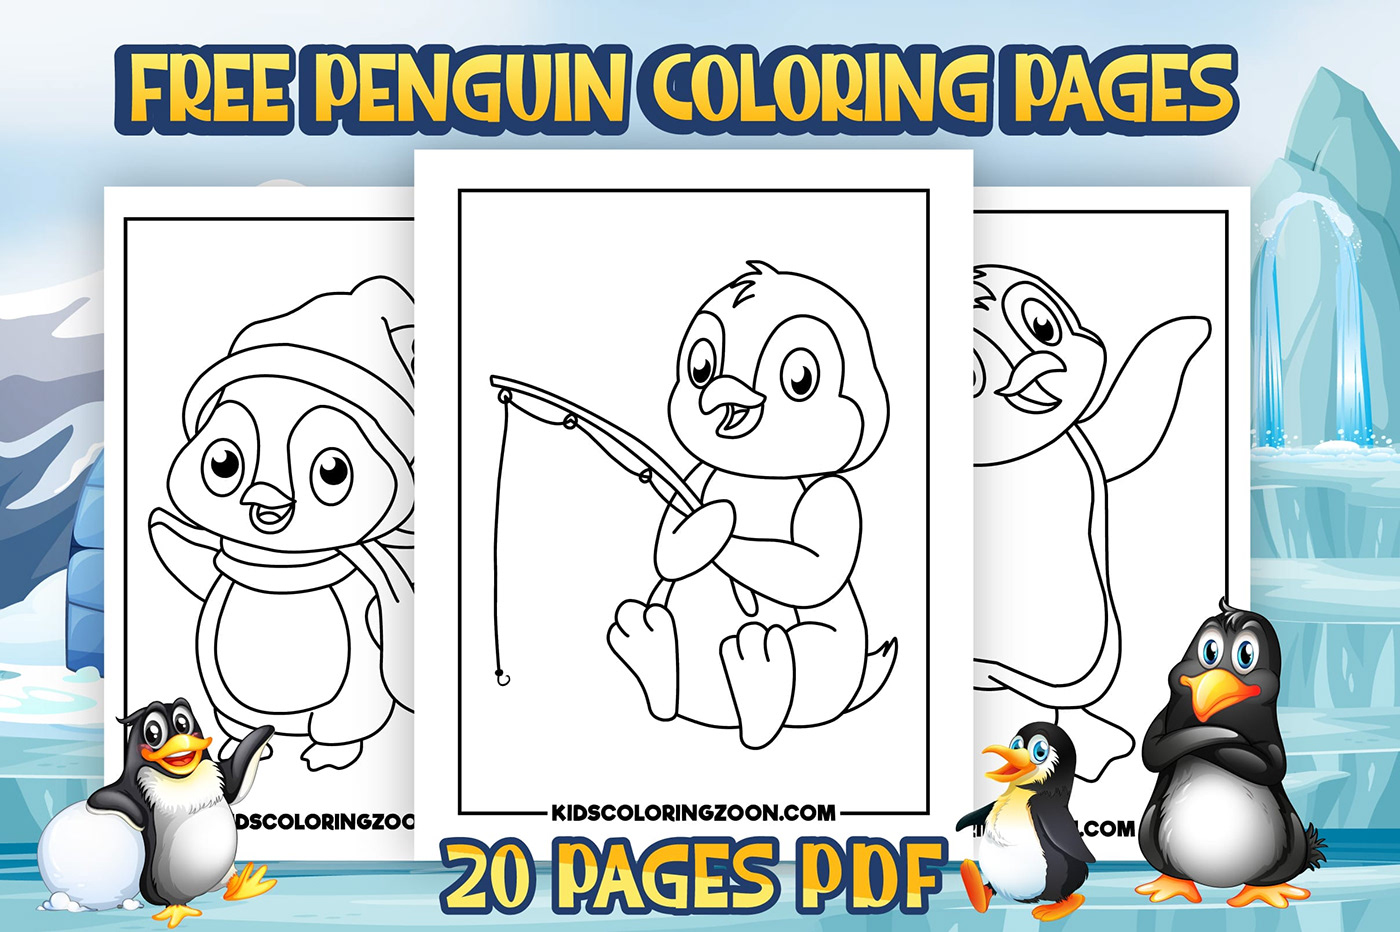 cartoon coloring book Coloring Pages Drawing  kdp kdp coloring book KDP Interior line art penguin penguin coloring page